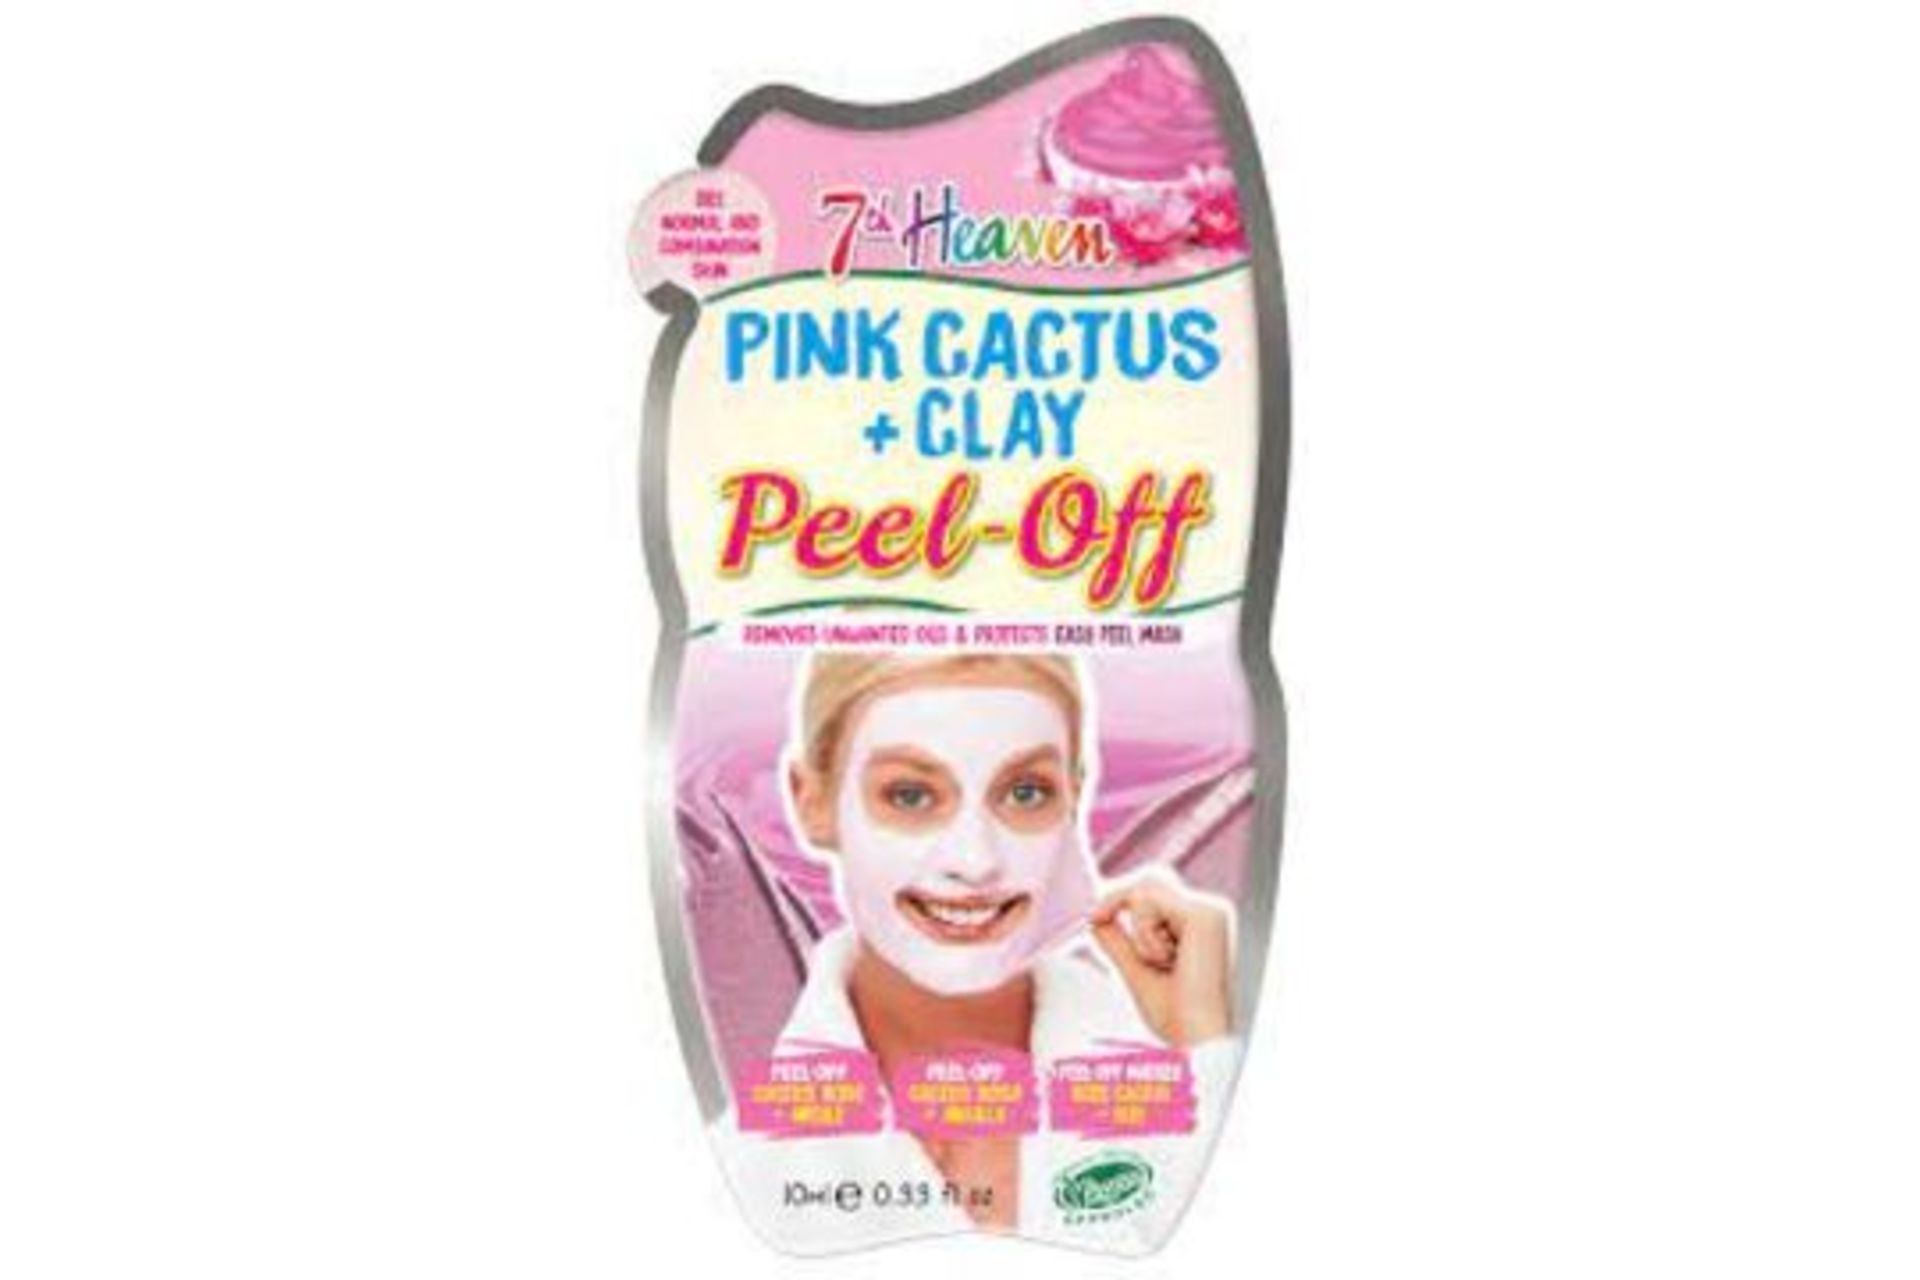 361 X BRAND NEW 7TH HEAVEN PINK CACTUS AND CLAY PEEL OFF 10ML MASKS PW